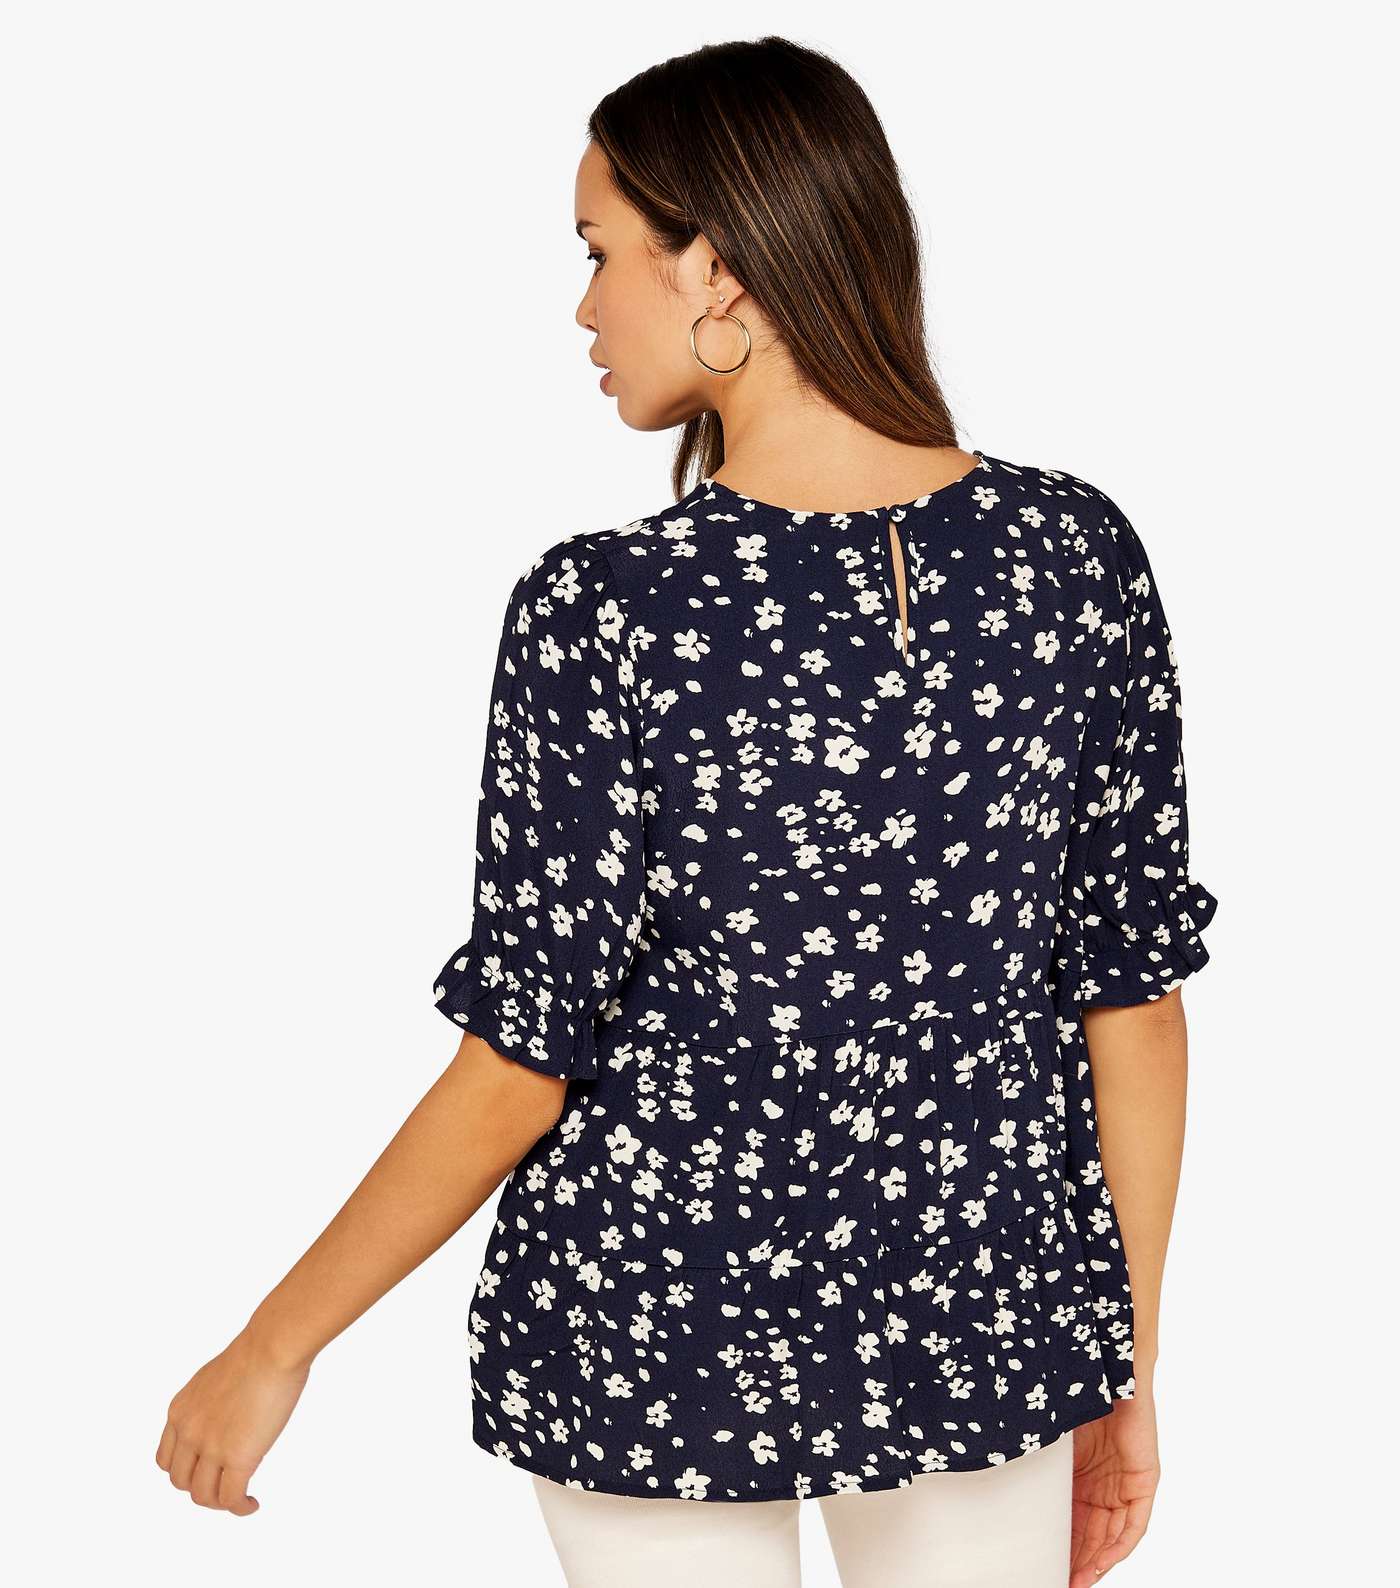 Apricot Navy Ditsy Floral Tiered Peplum Top Image 3